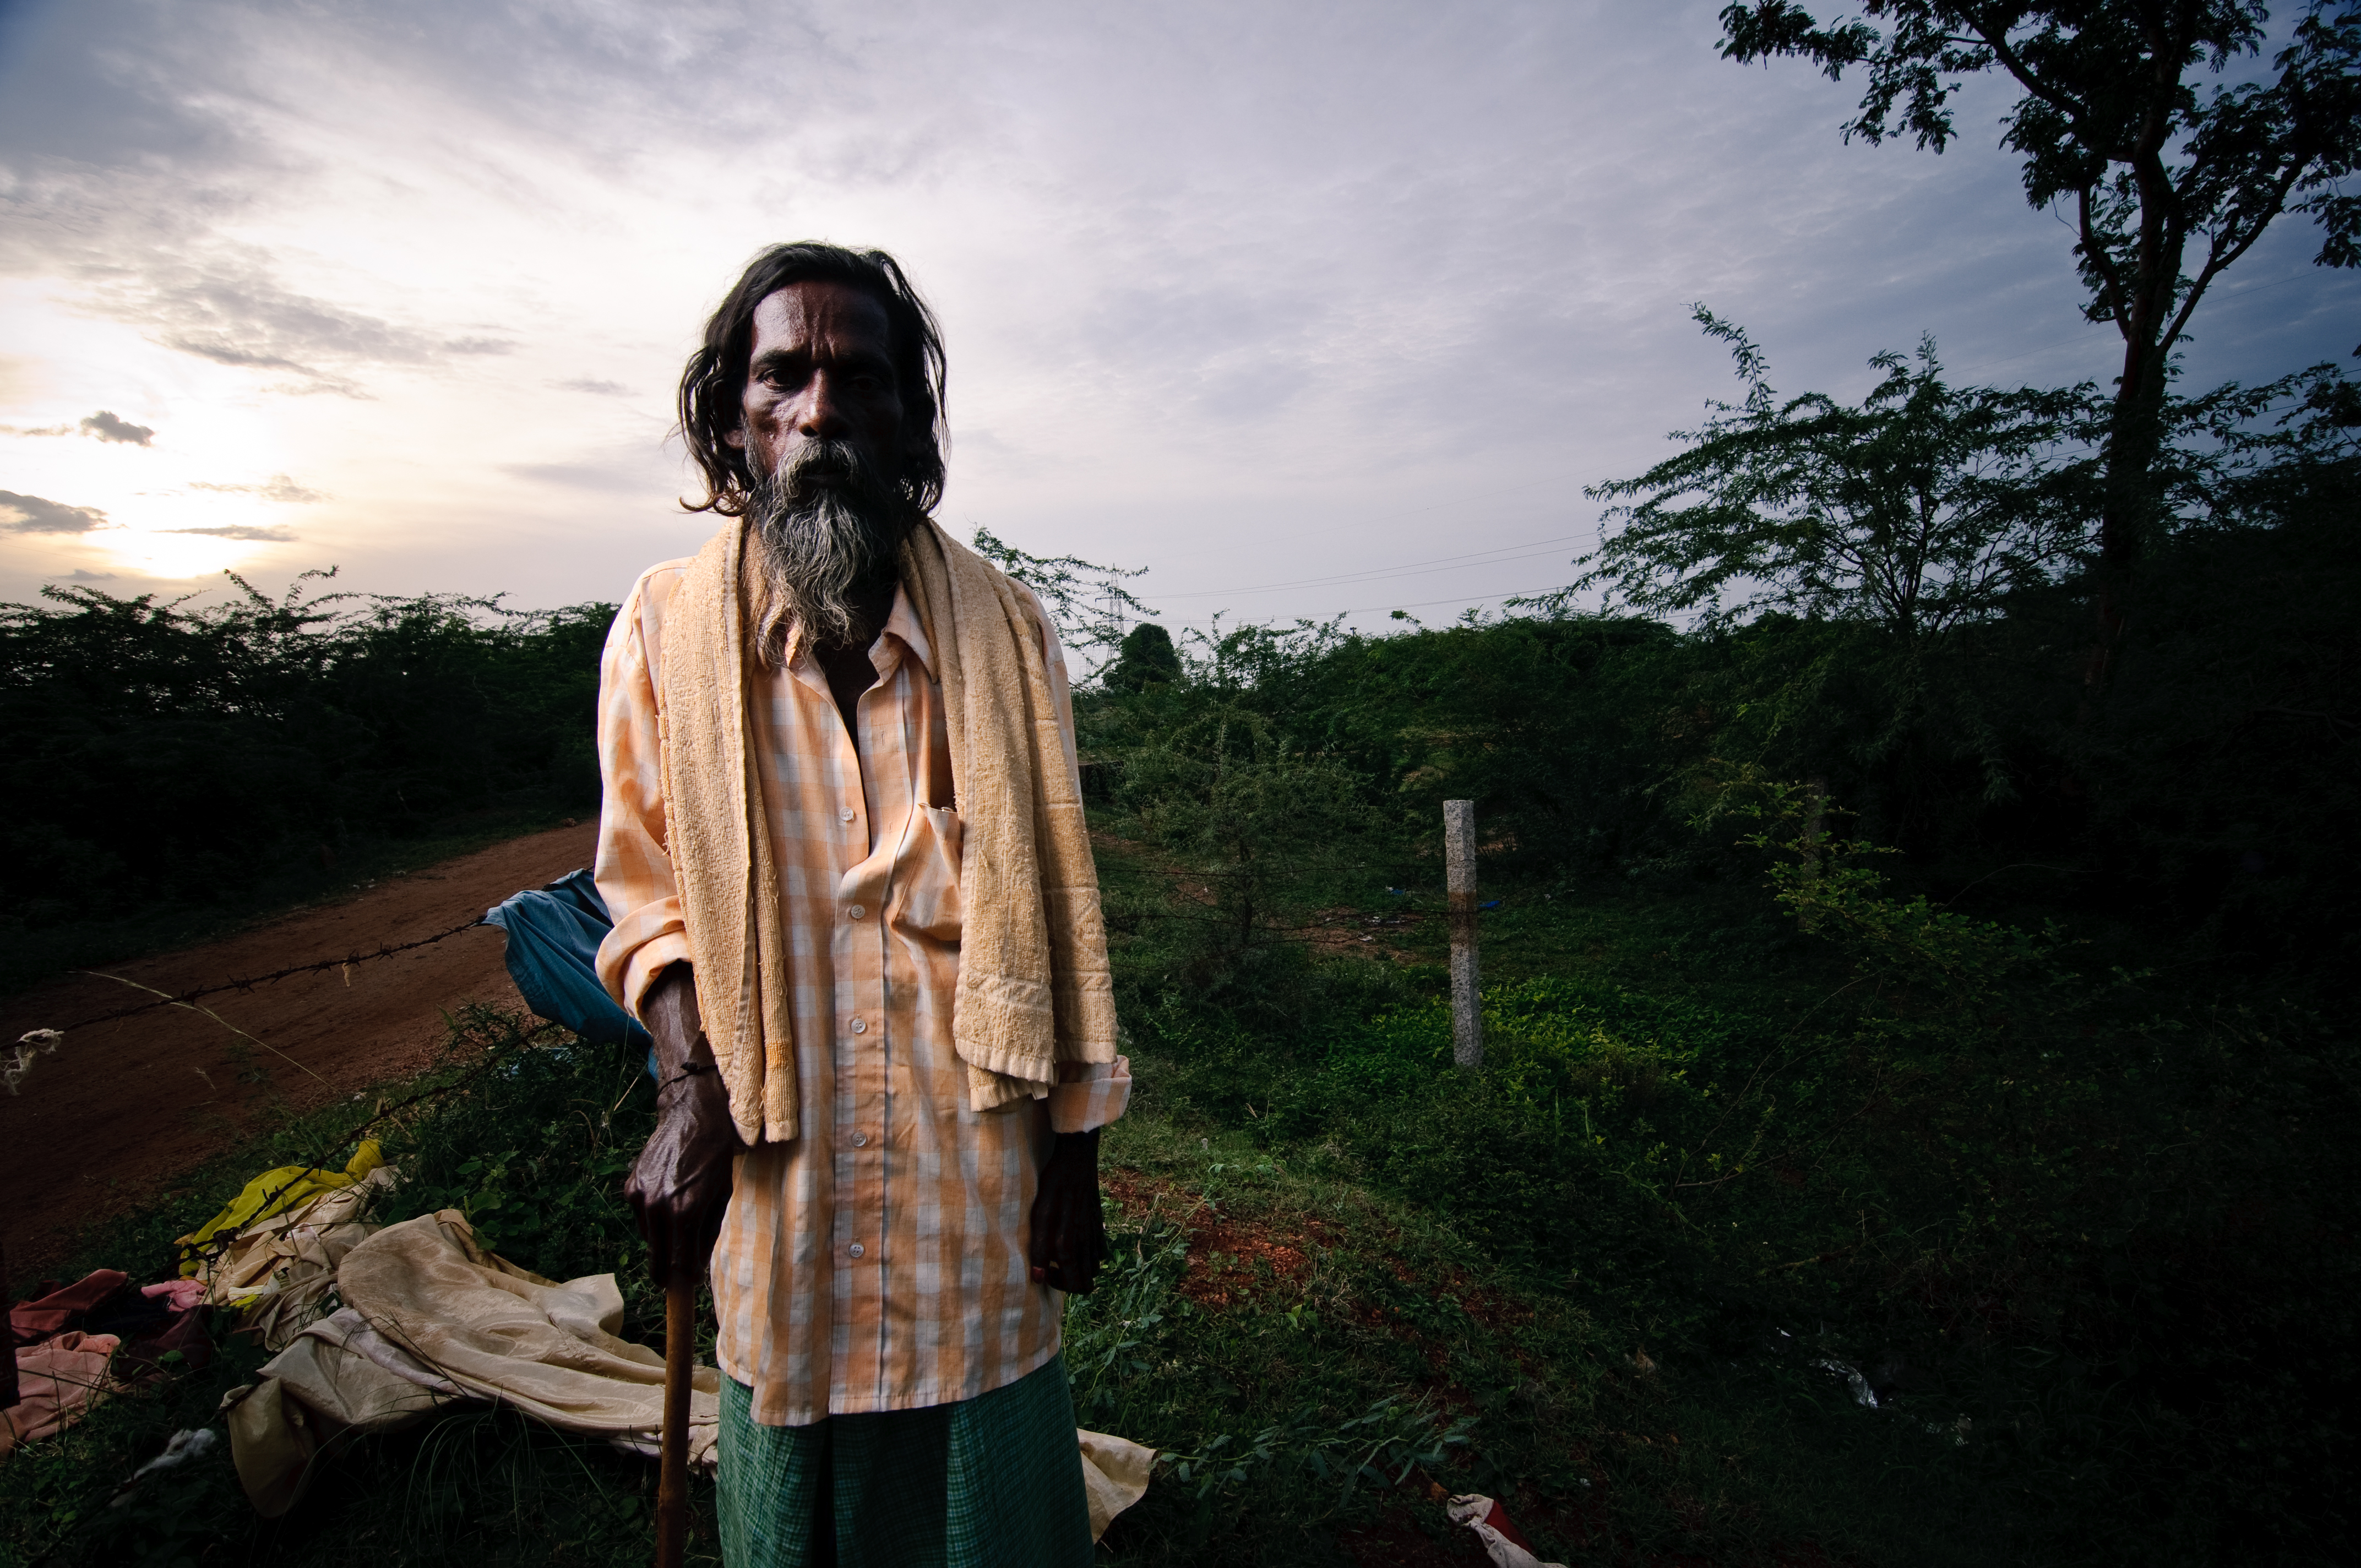 Indian man on a dirt road